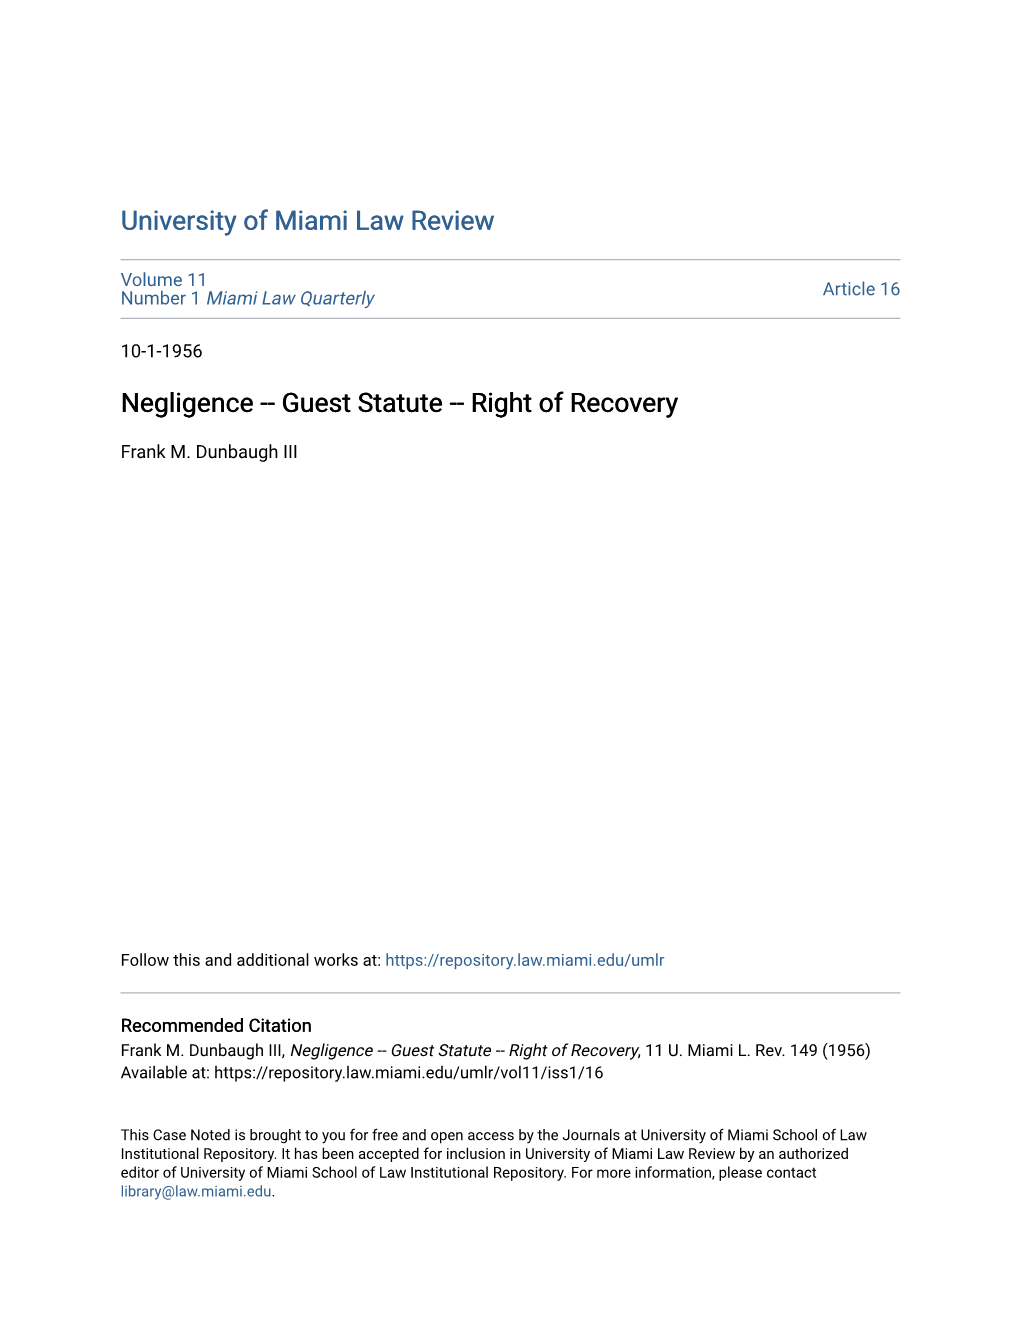 Negligence -- Guest Statute -- Right of Recovery